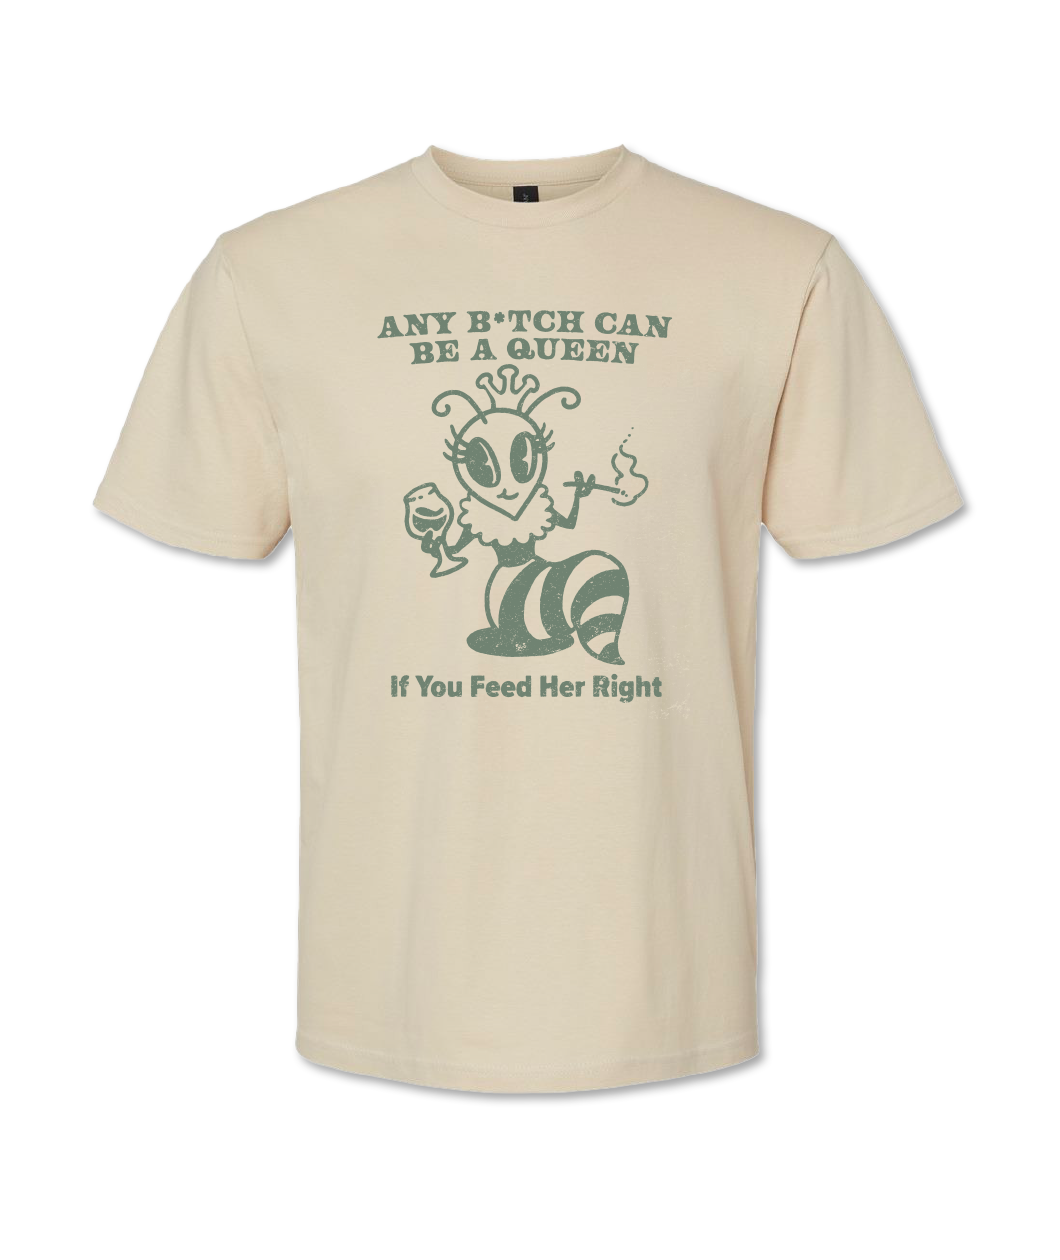 Natural colored t shirt with screen printed sage green text & artwork that says, 